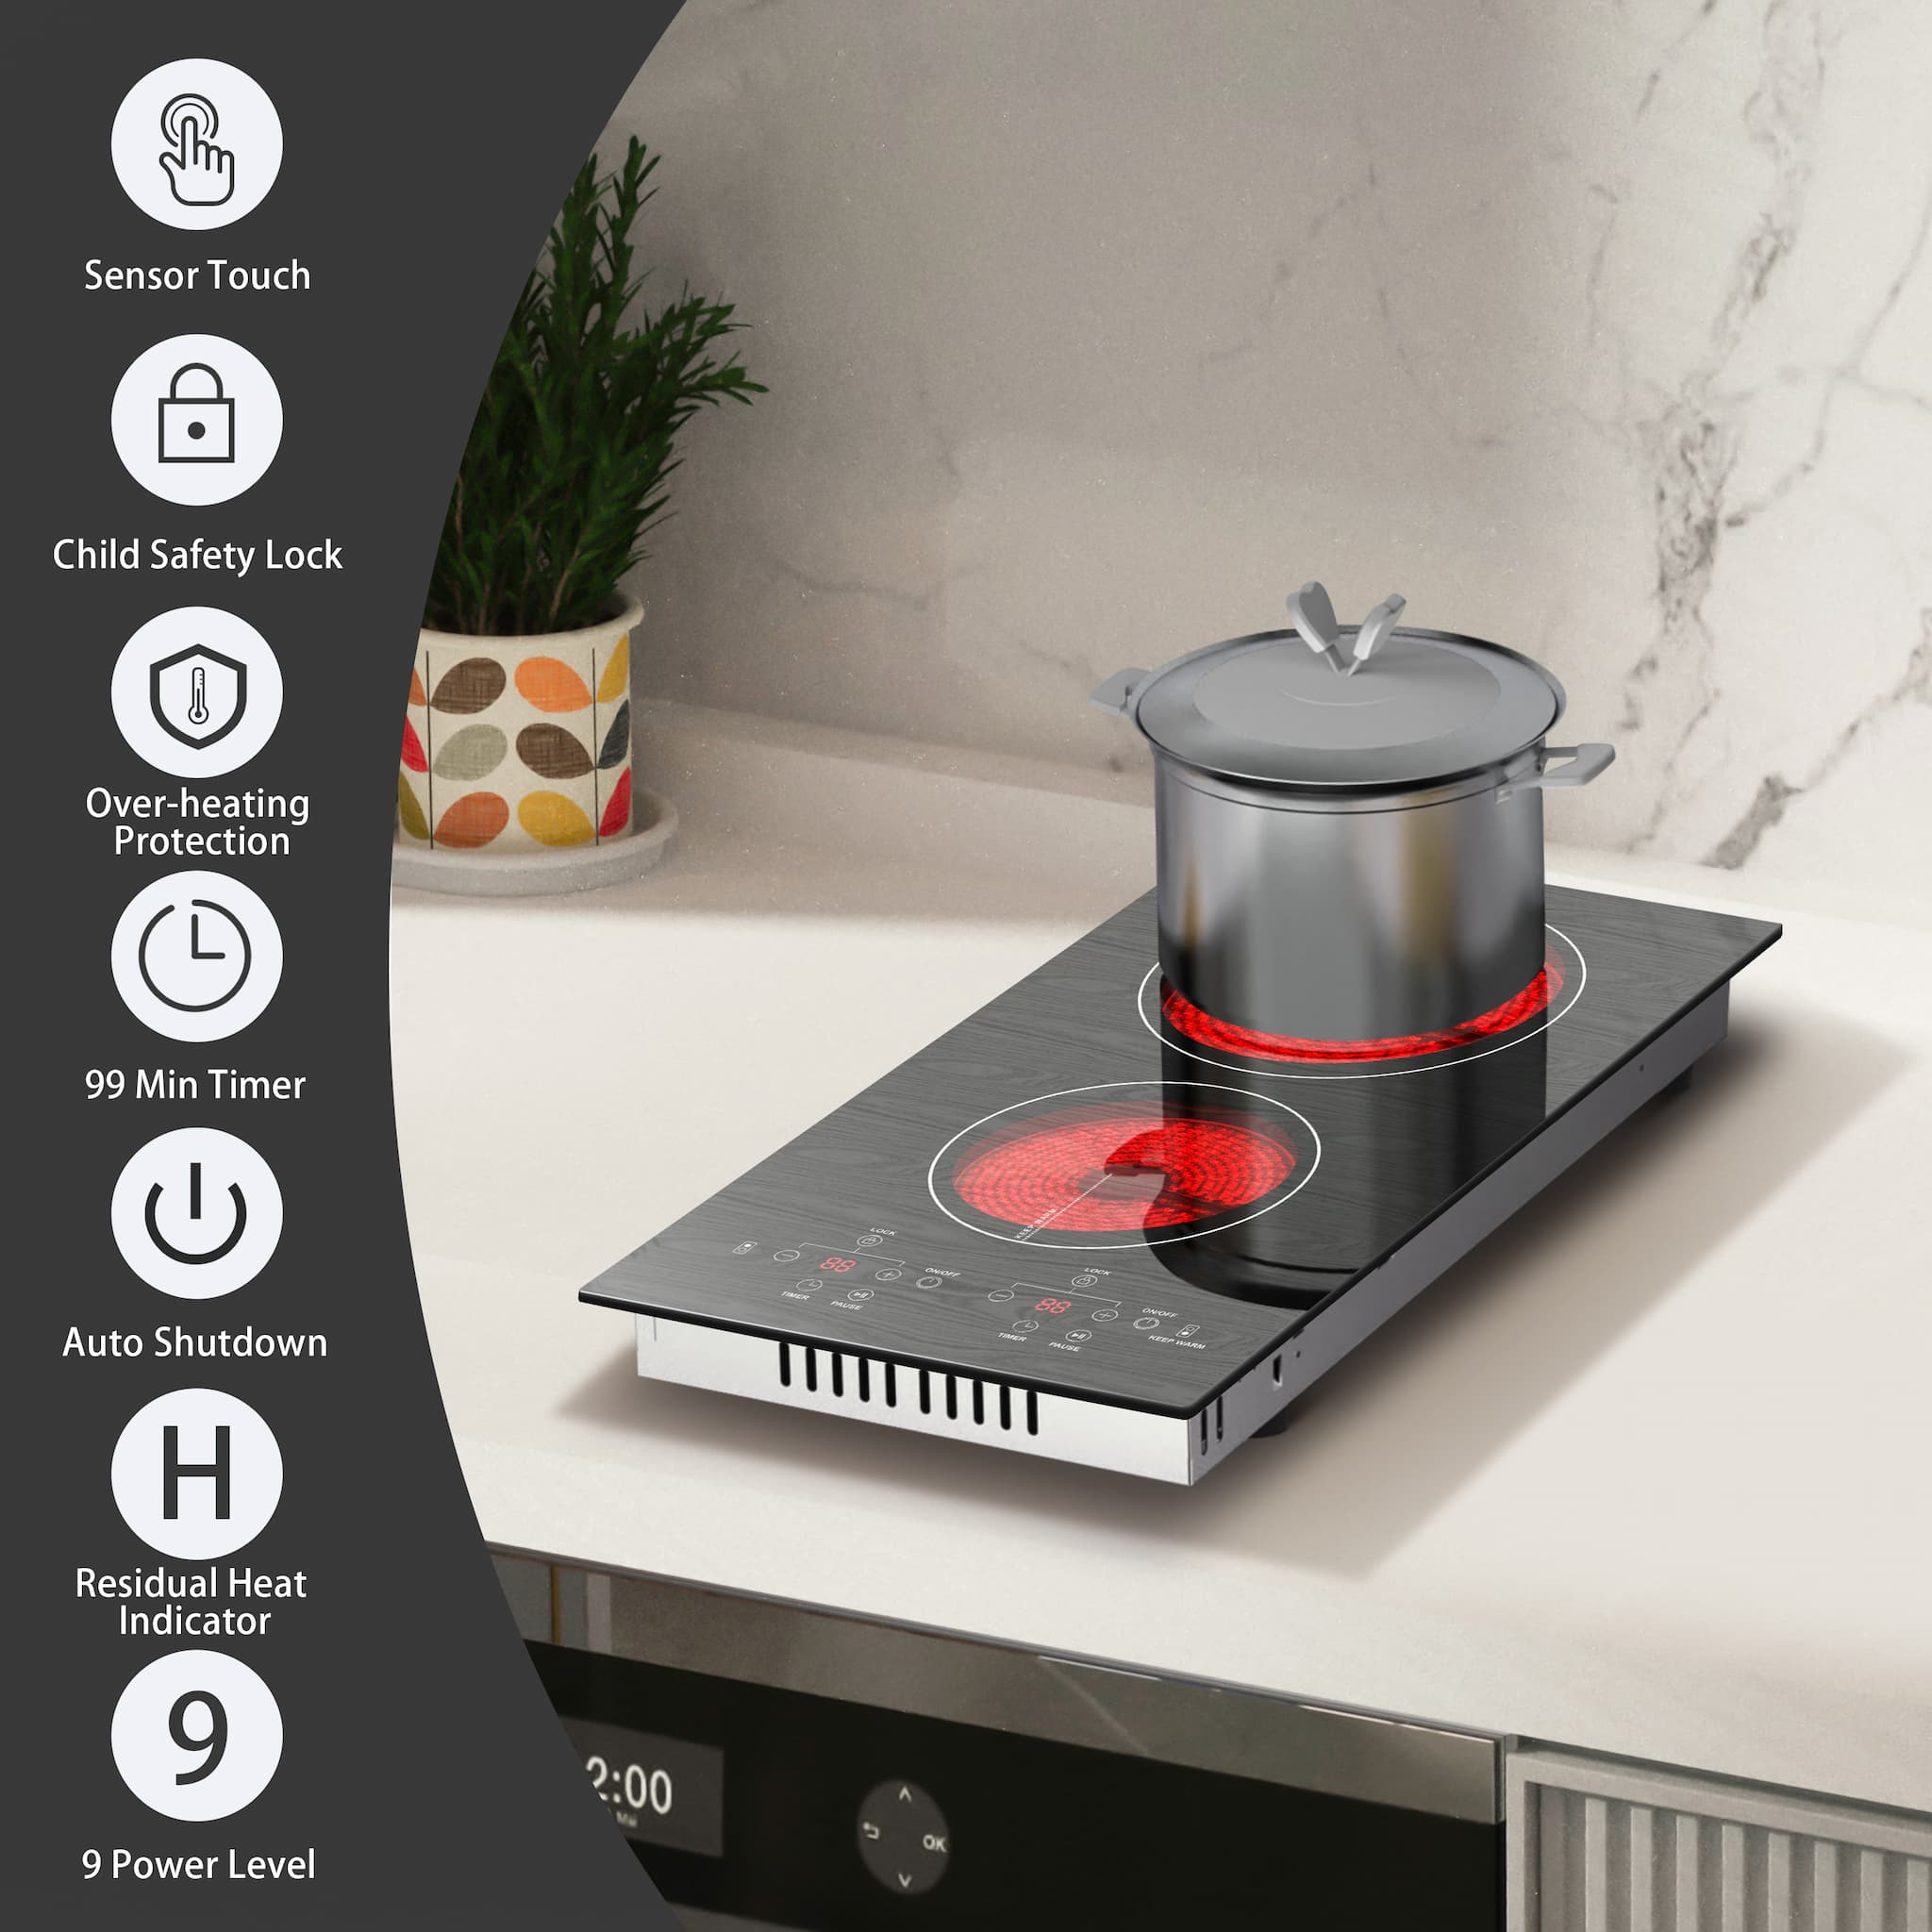 our two burners electric cooktop is just right for your needs. It is equipped with a variety of features such as 99-minute timer, automatic shut-off, child safety lock, pause function, high-temperature warning, and overheat protection. You can use any material of cookware (iron, stainless steel, ceramic, glass, copper) on the electric stovetop 2 burners.